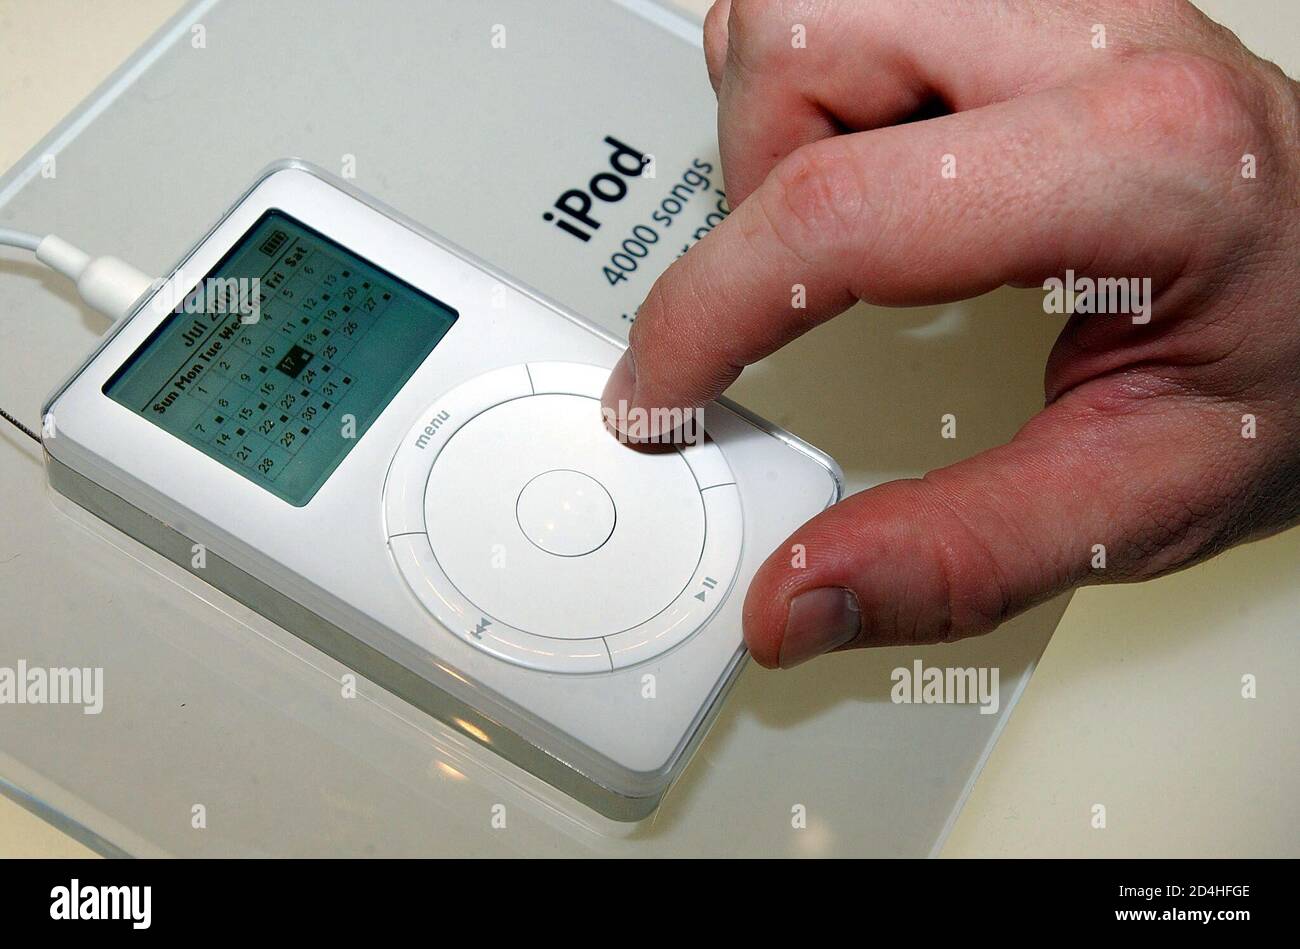 An updated version of Apple's popular iPod MP3 player was introduced  featuring a larger hard drive and new software, including a calendar at the  Macworld Conference and Expo in New York on